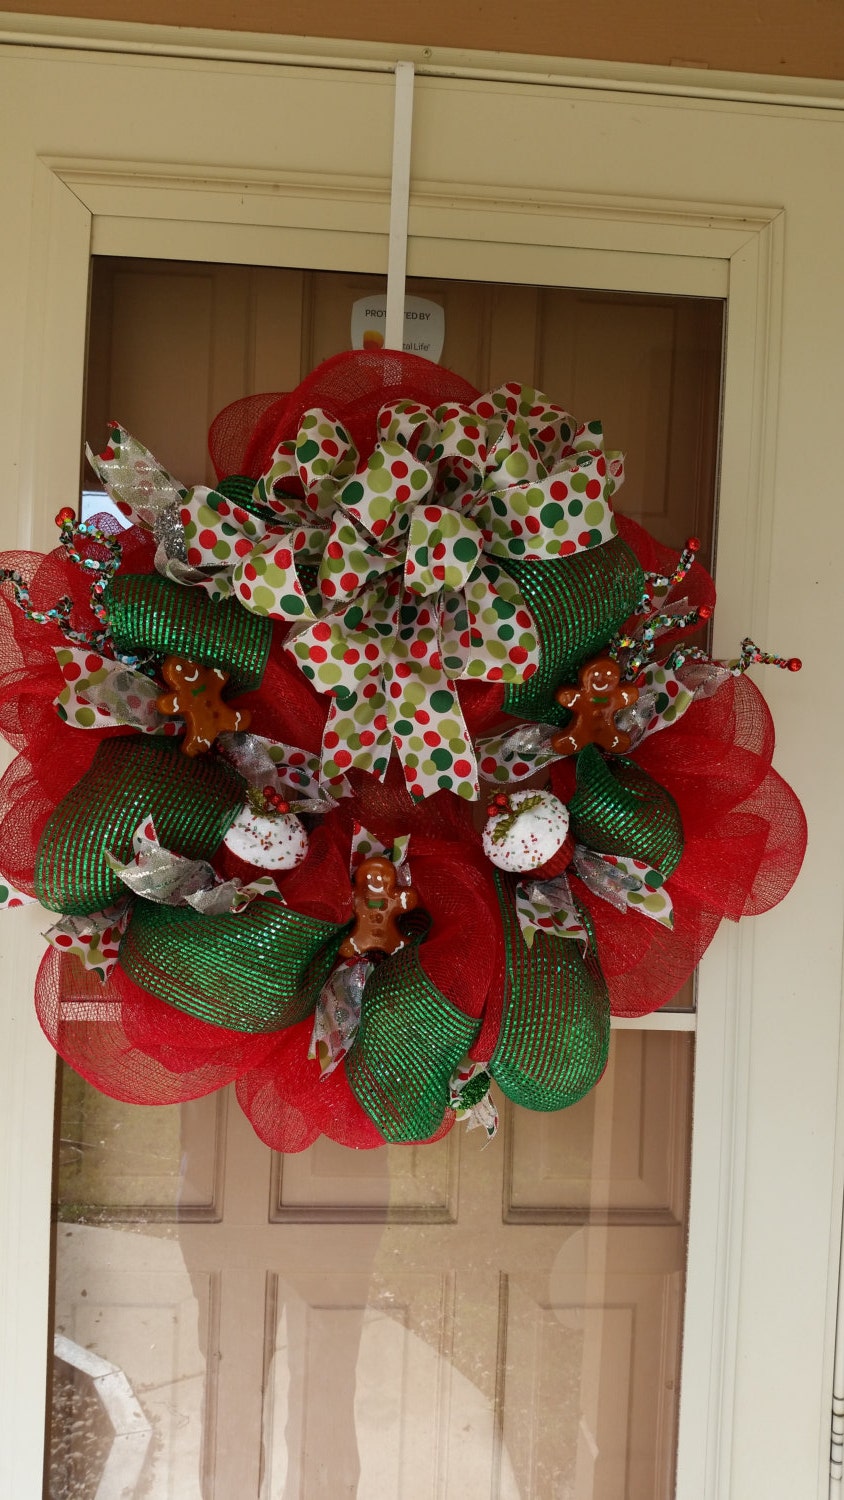 Deco Mesh Christmas Wreath. red, green, multi color silk wired ribbon used. gingerbread men and cupcake decorations added.